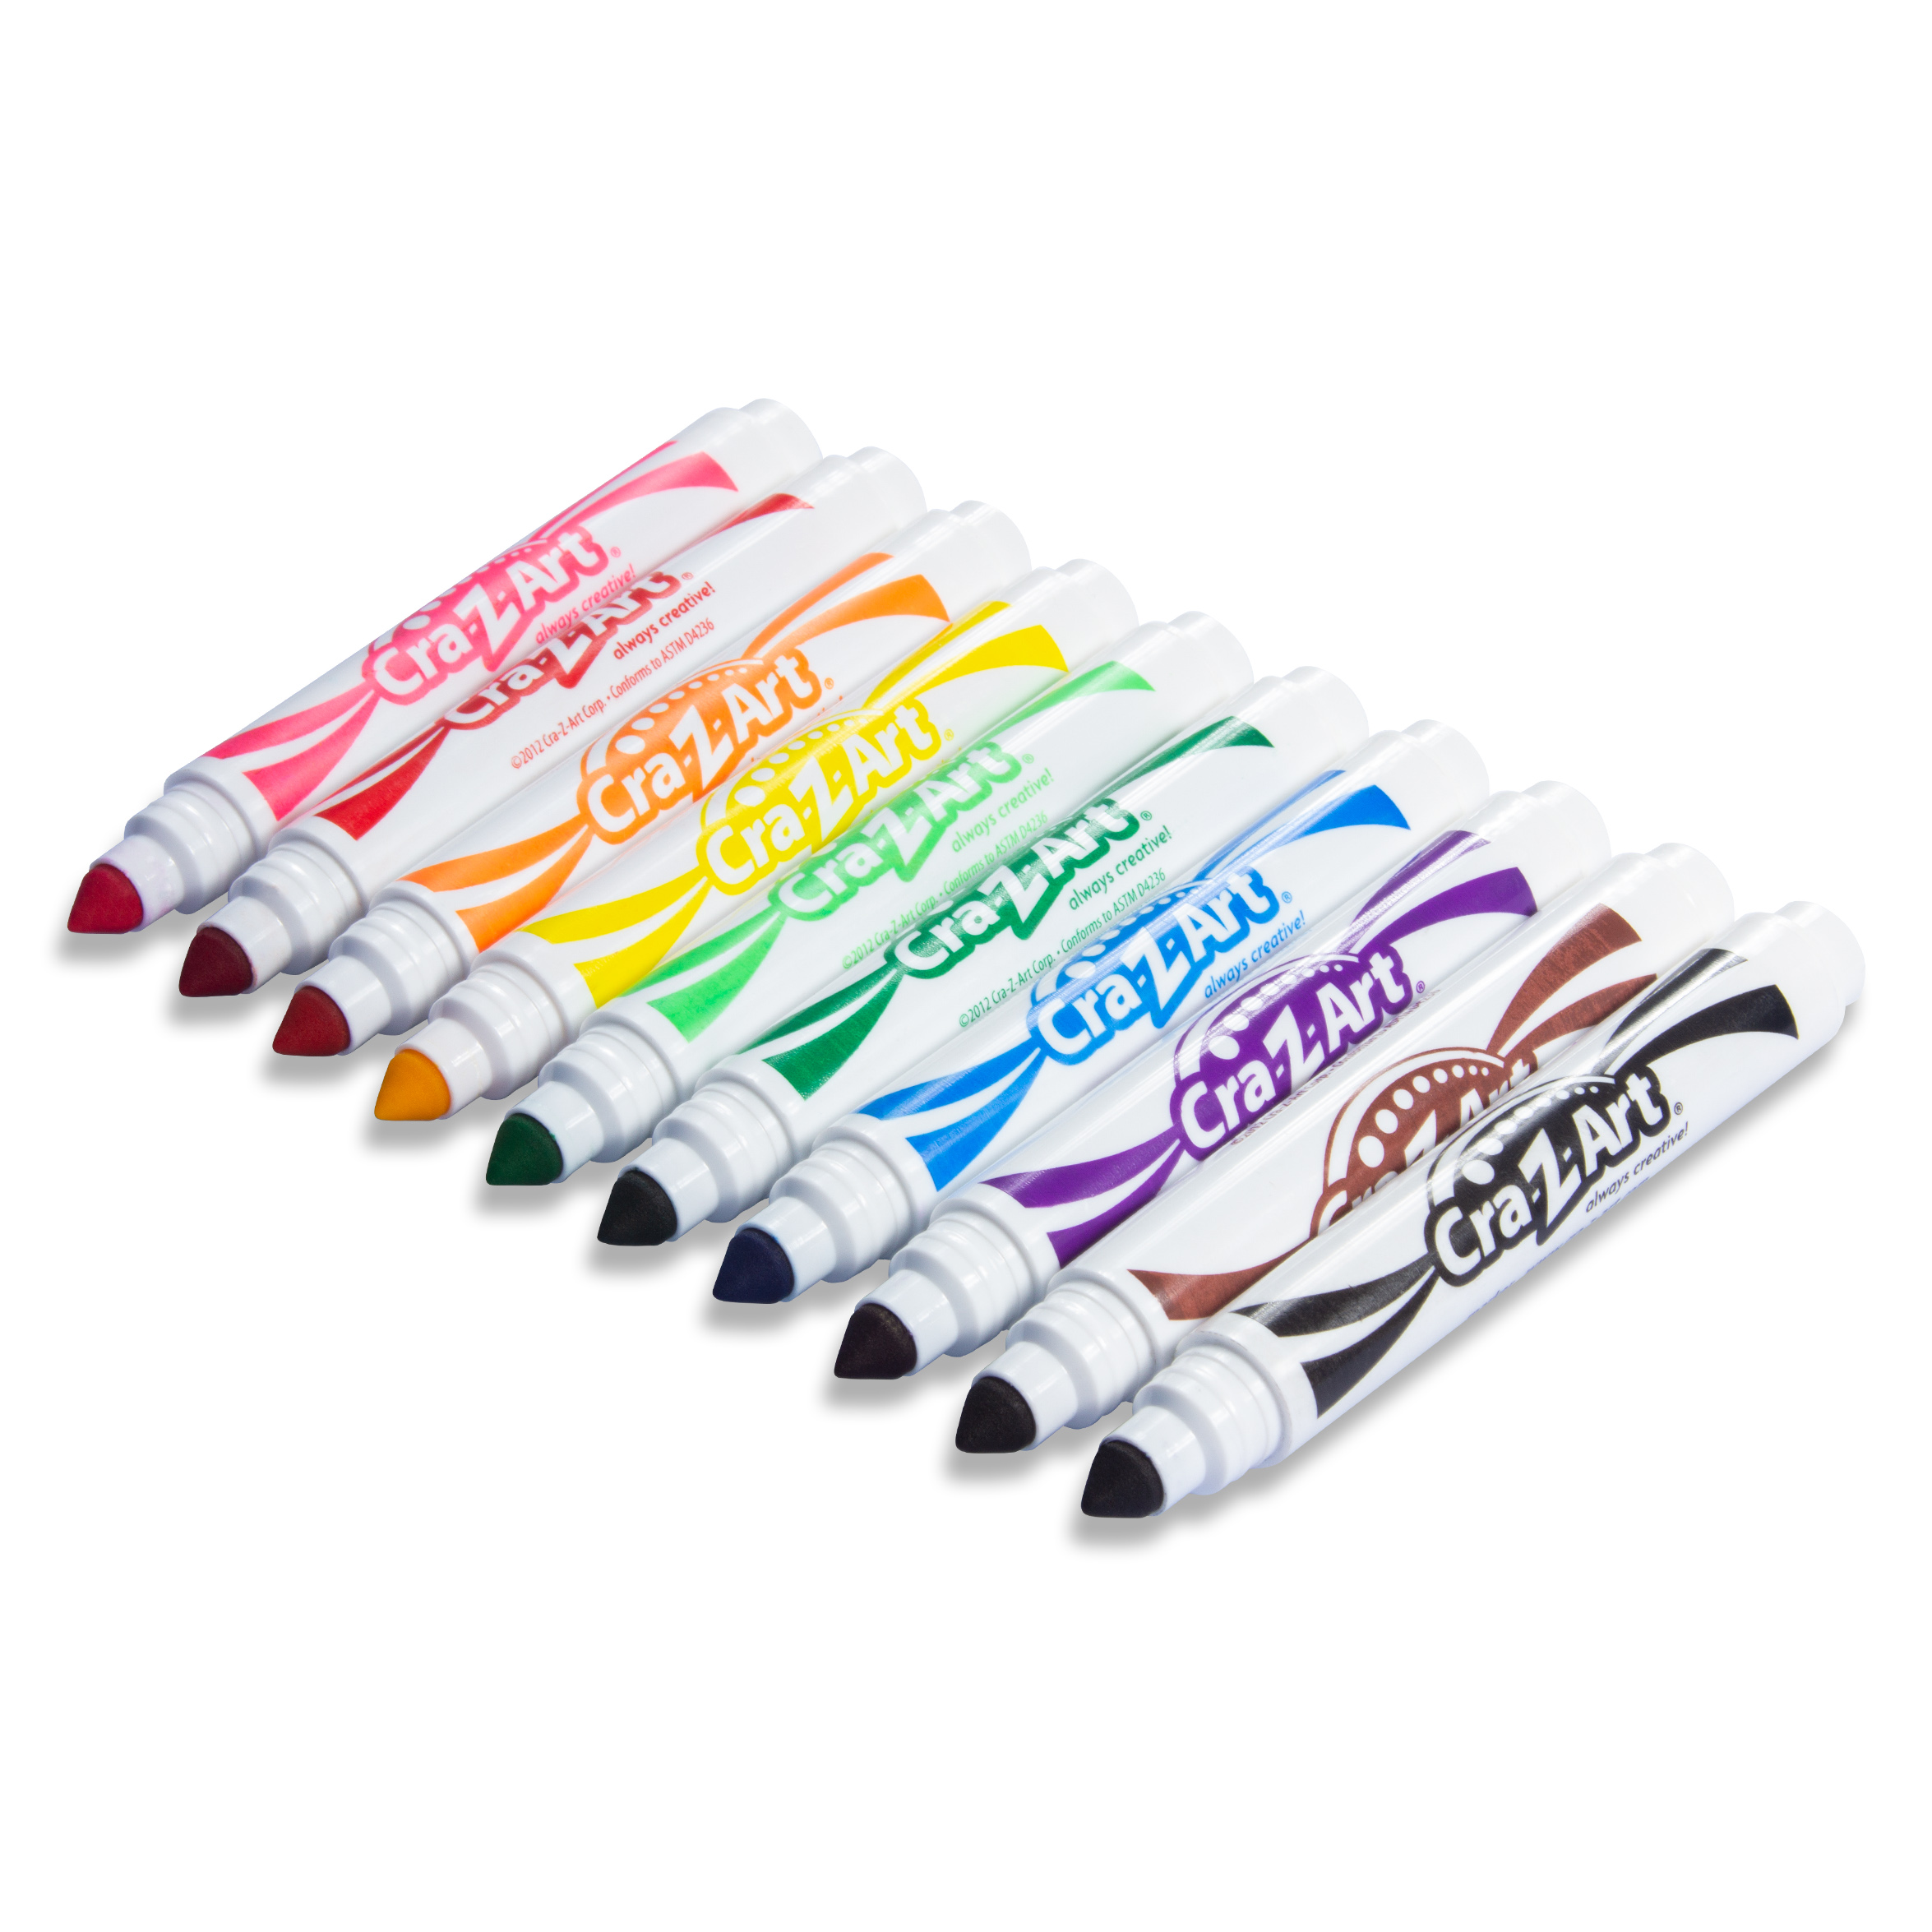 Cra-Z-Art Washable Super Tip Markers, 64 Count - image 10 of 10